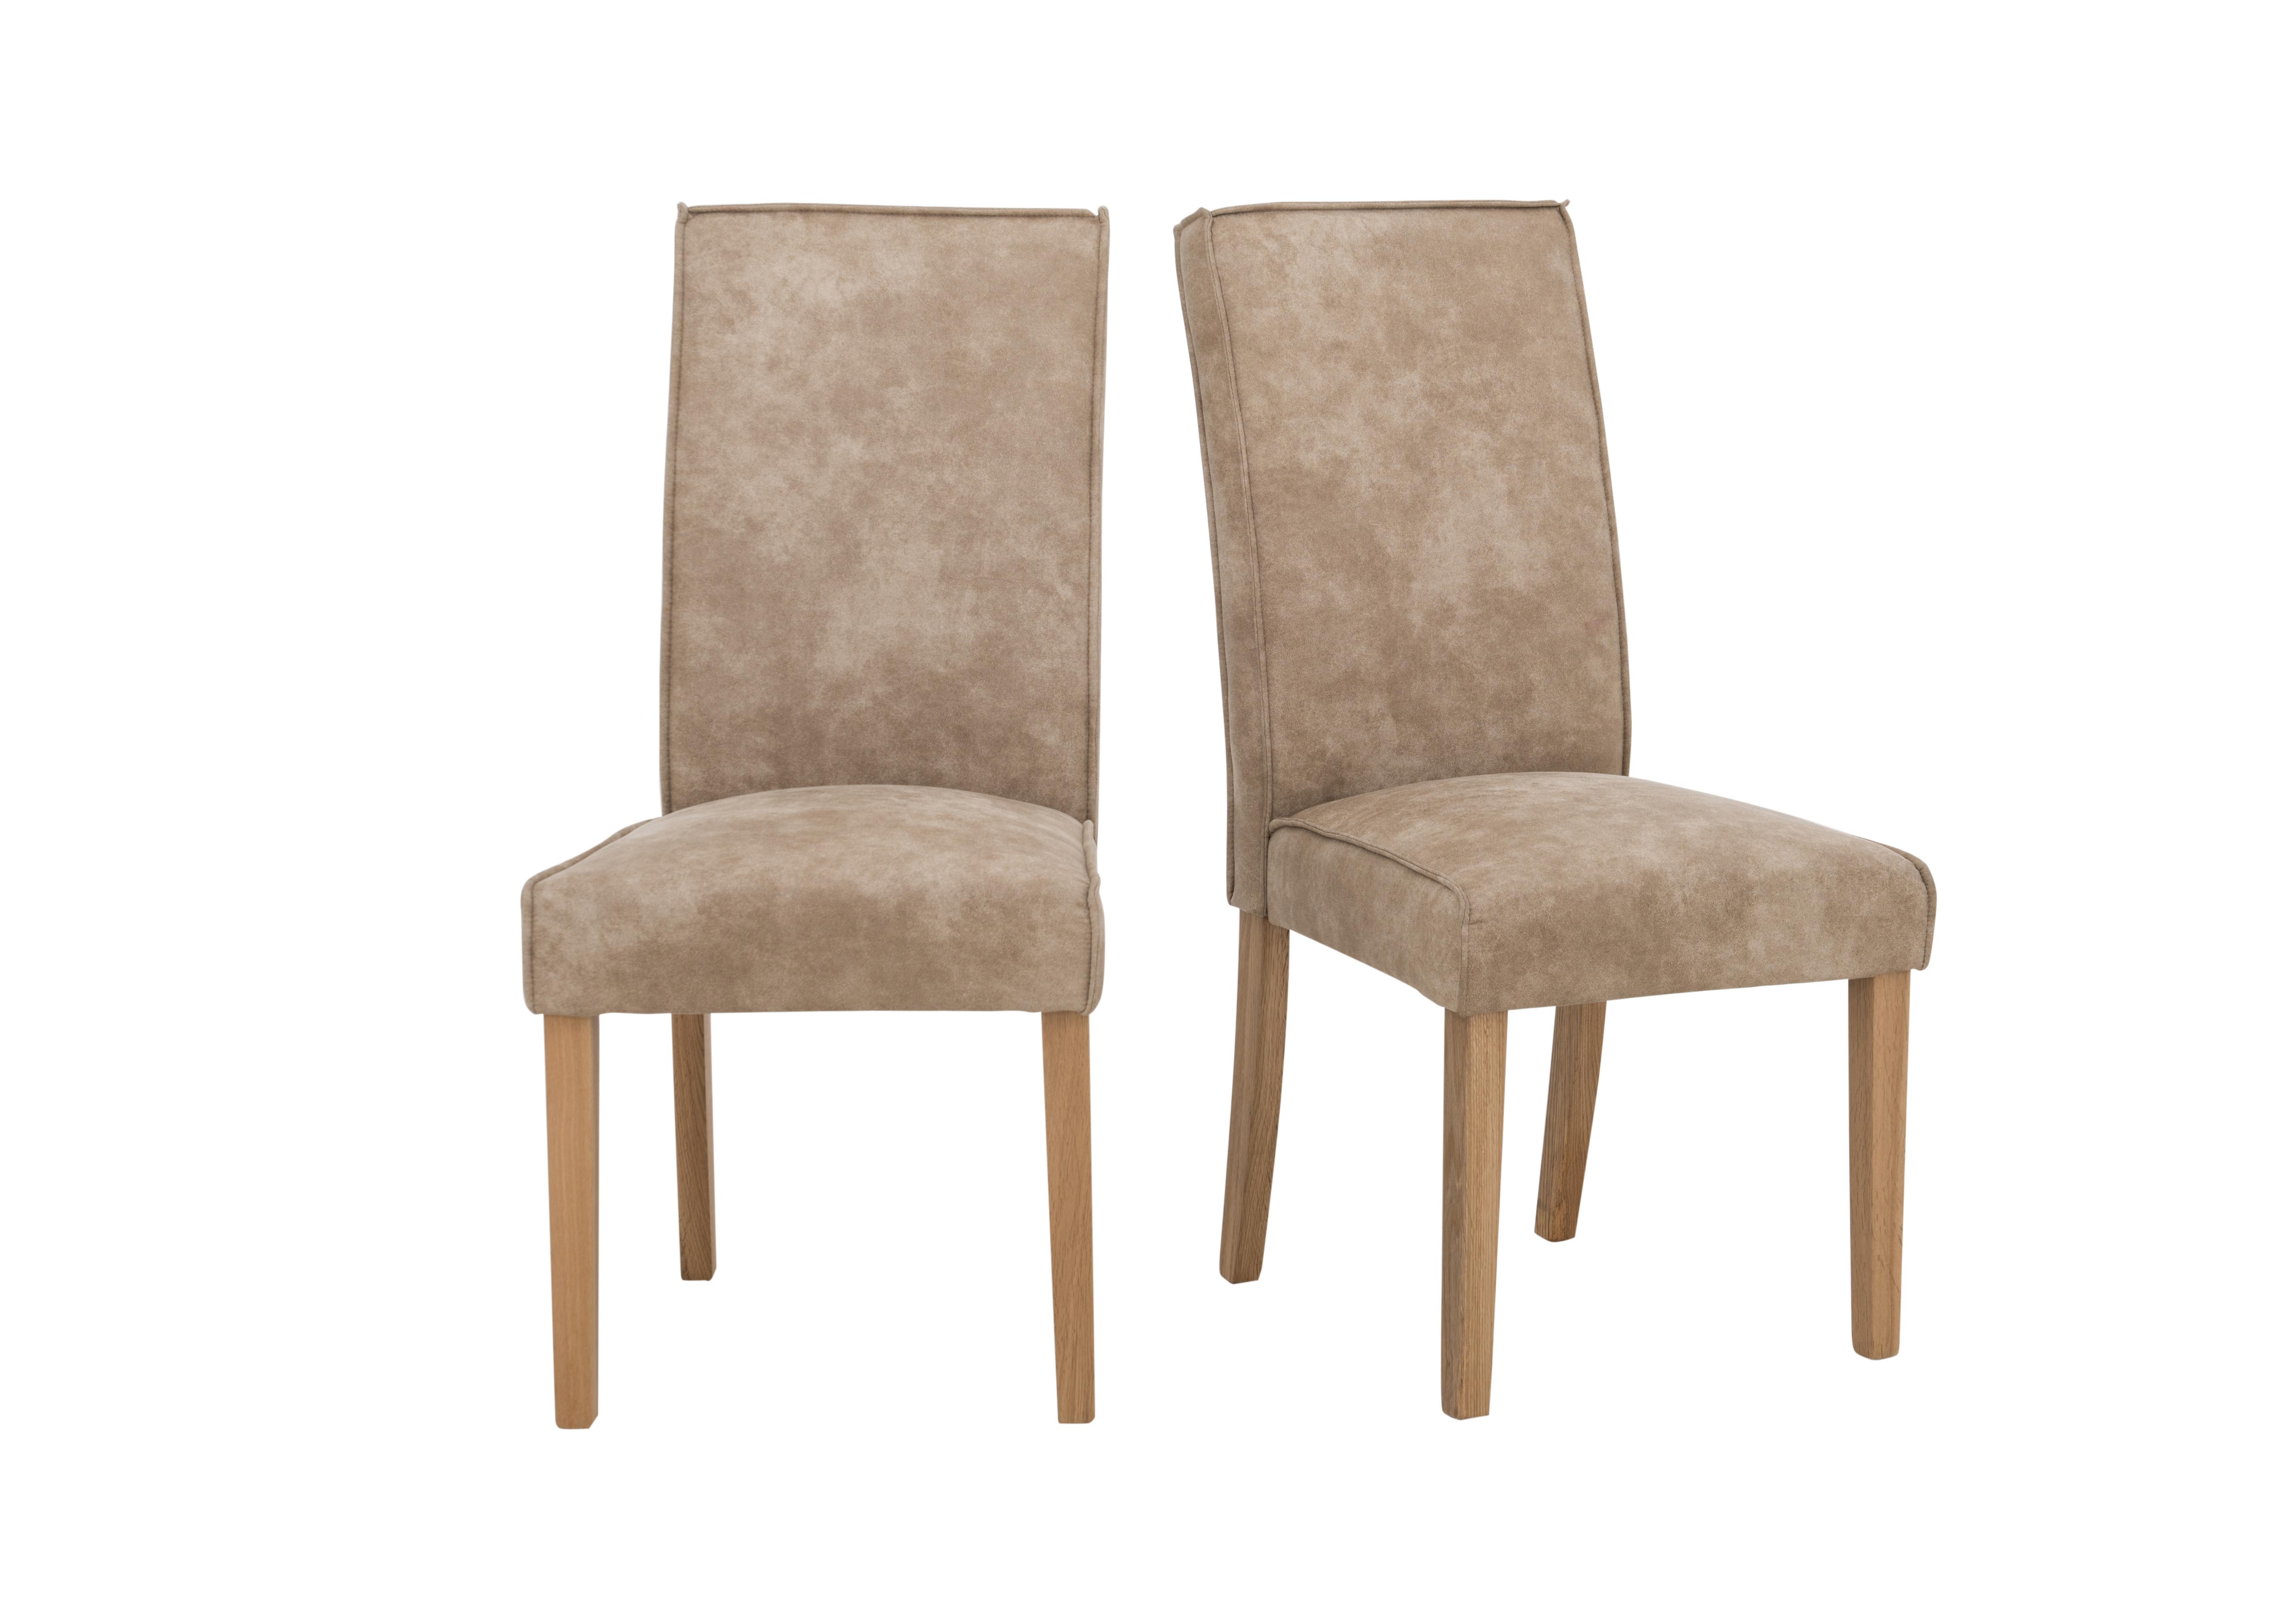 California Pair of Faux Suede Dining Chairs in  on Furniture Village